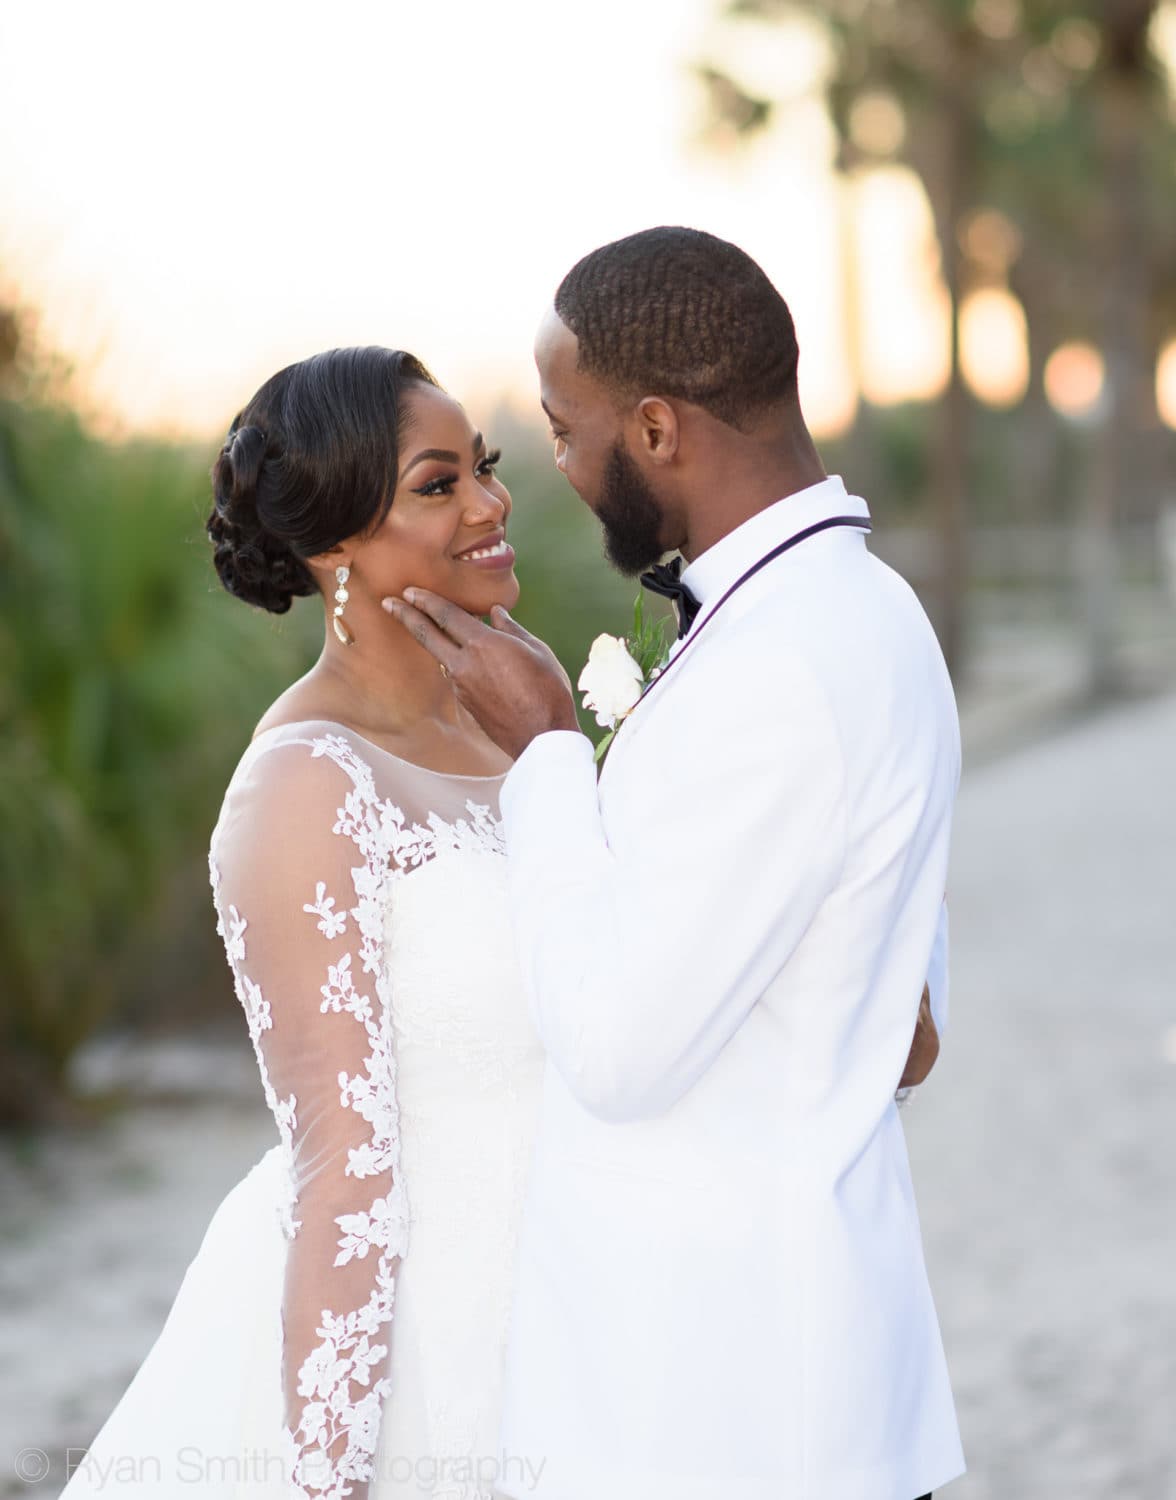 Bride smiling looking into groom's eyes - Doubletree Resort by Hilton Myrtle Beach